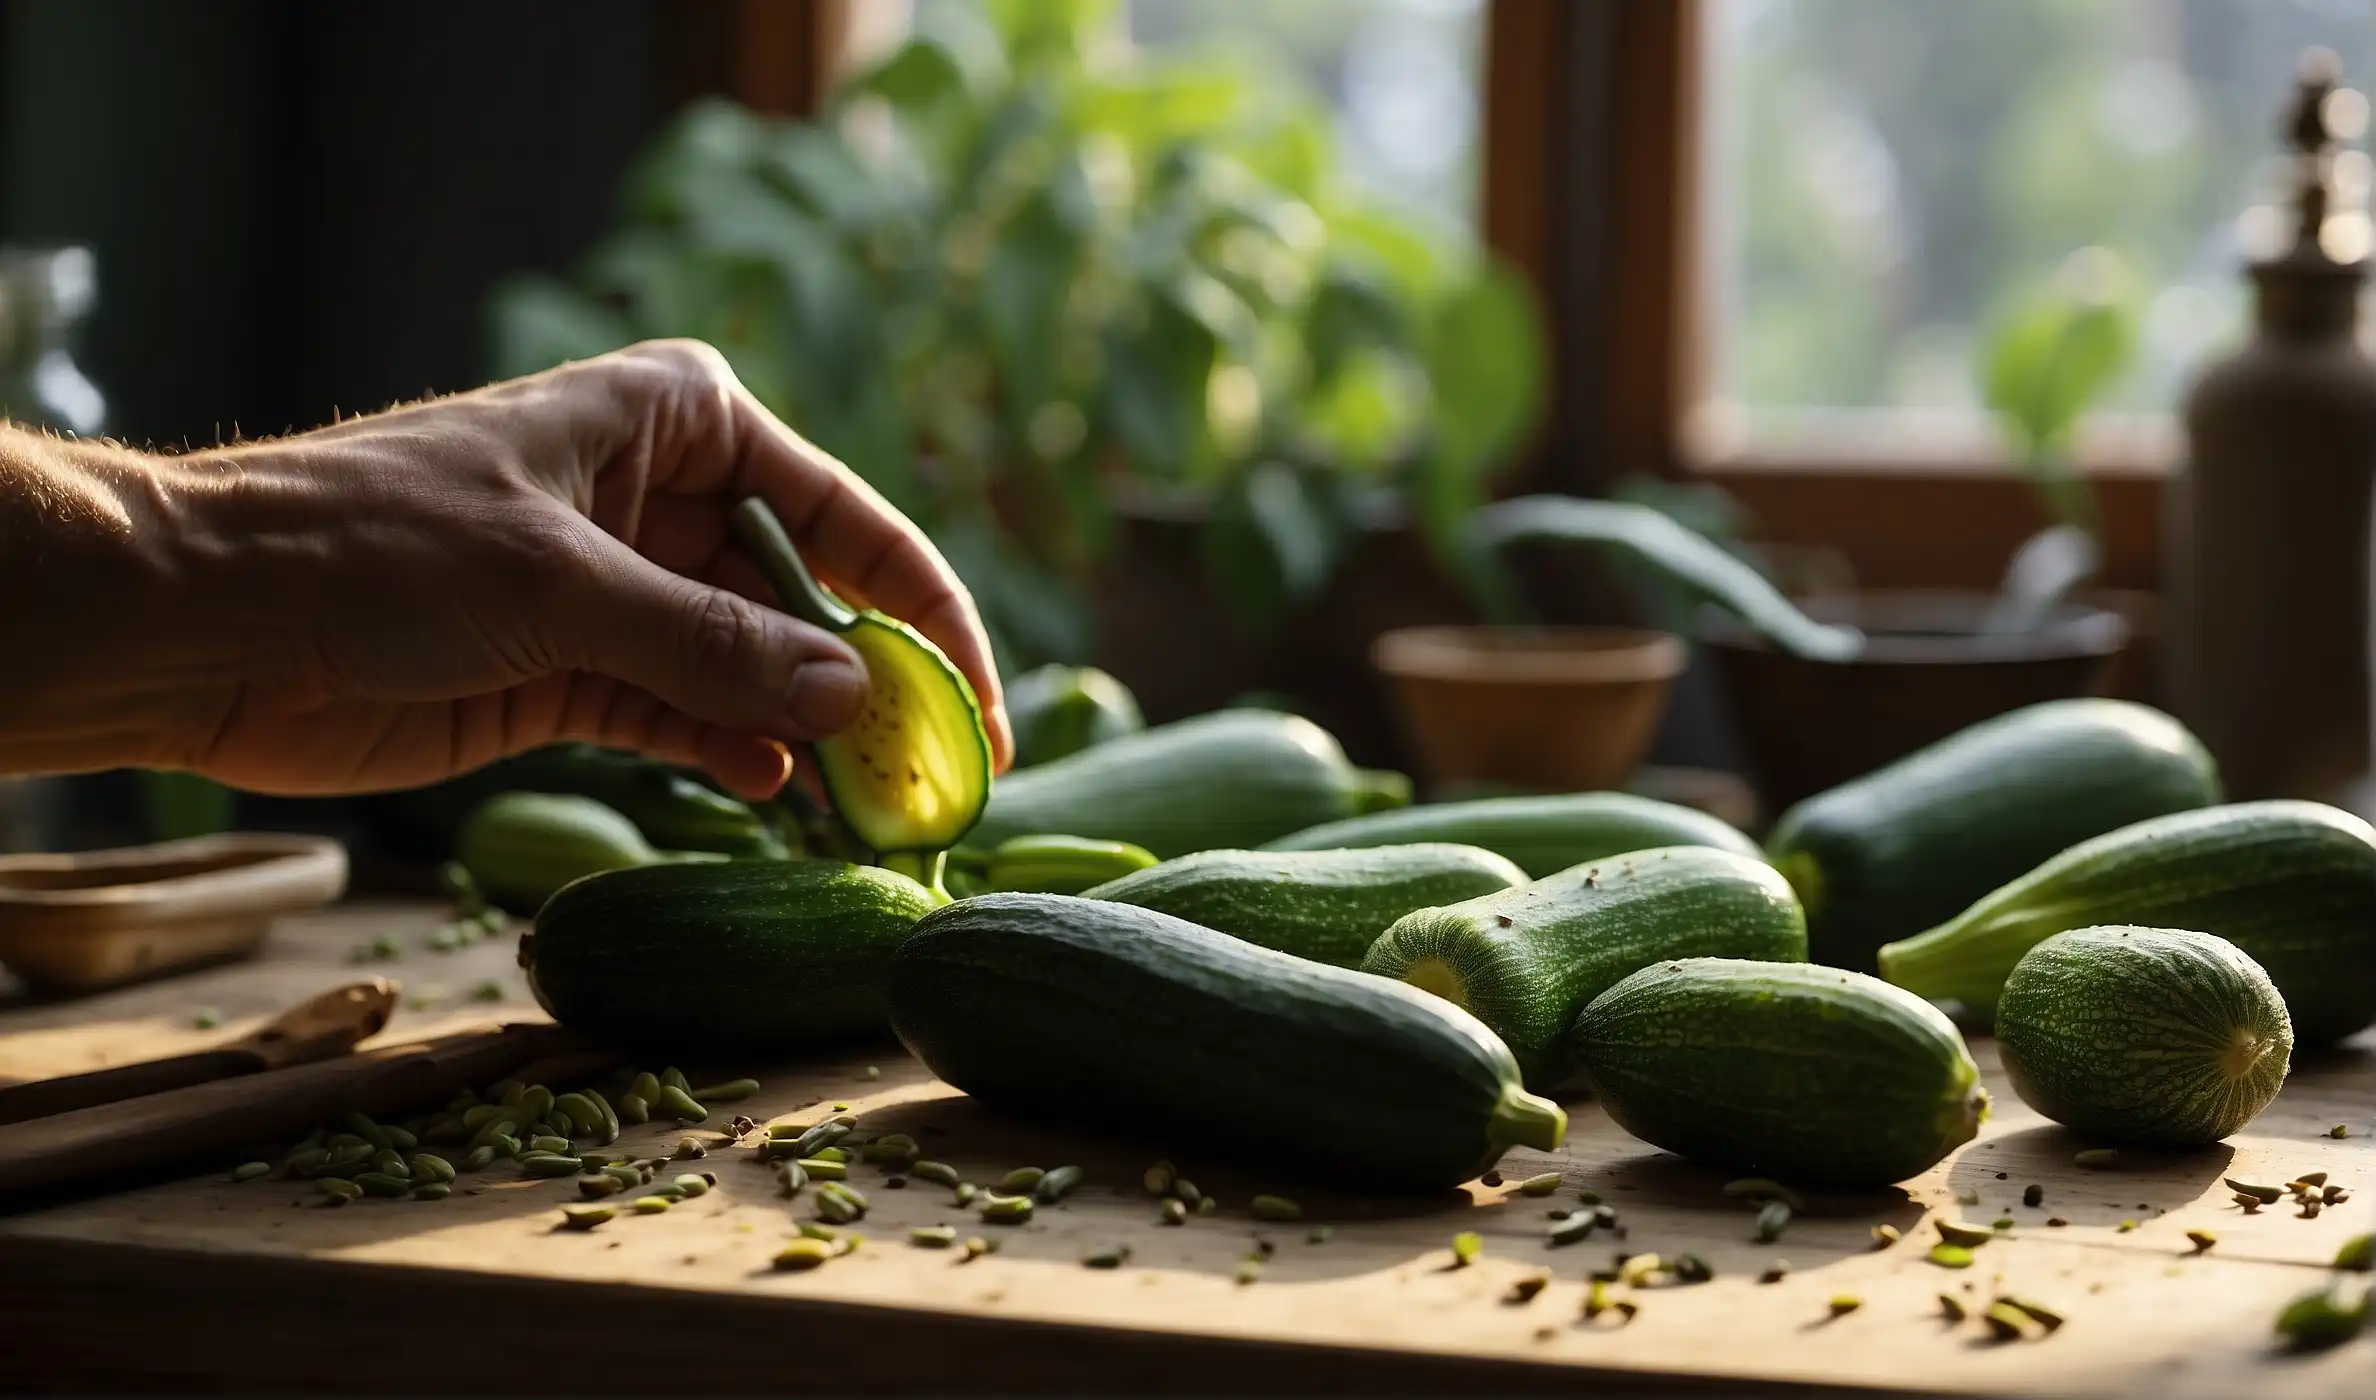 Learn how to preserve zucchini seeds